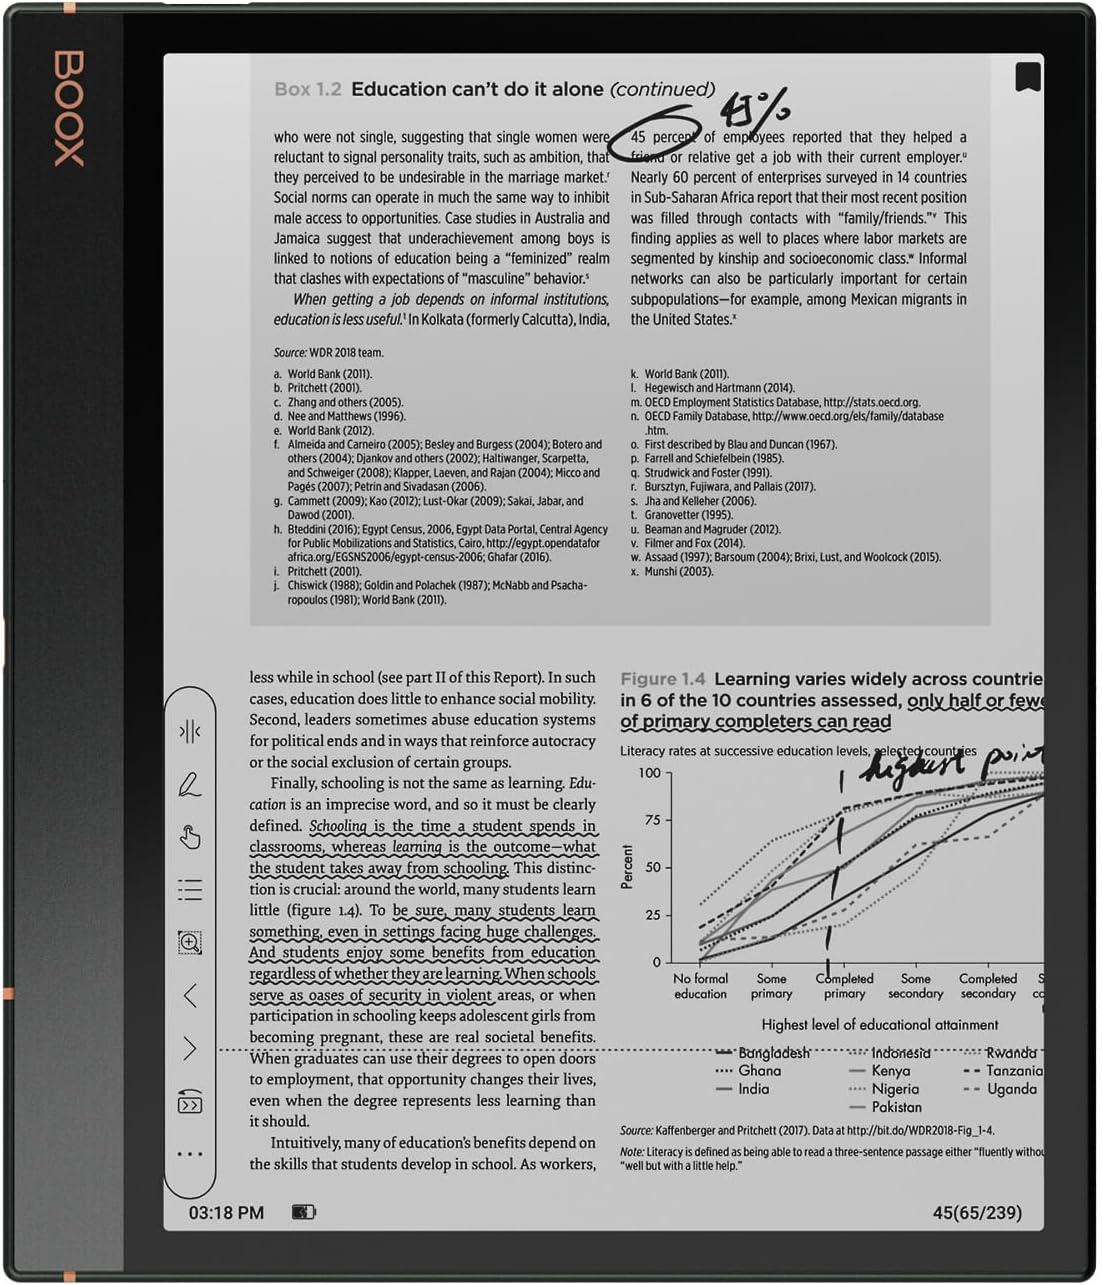 BOOX Tablet Note Air3 B/W E Ink Tablet Tablet 10.3 ePaper 4G 64G